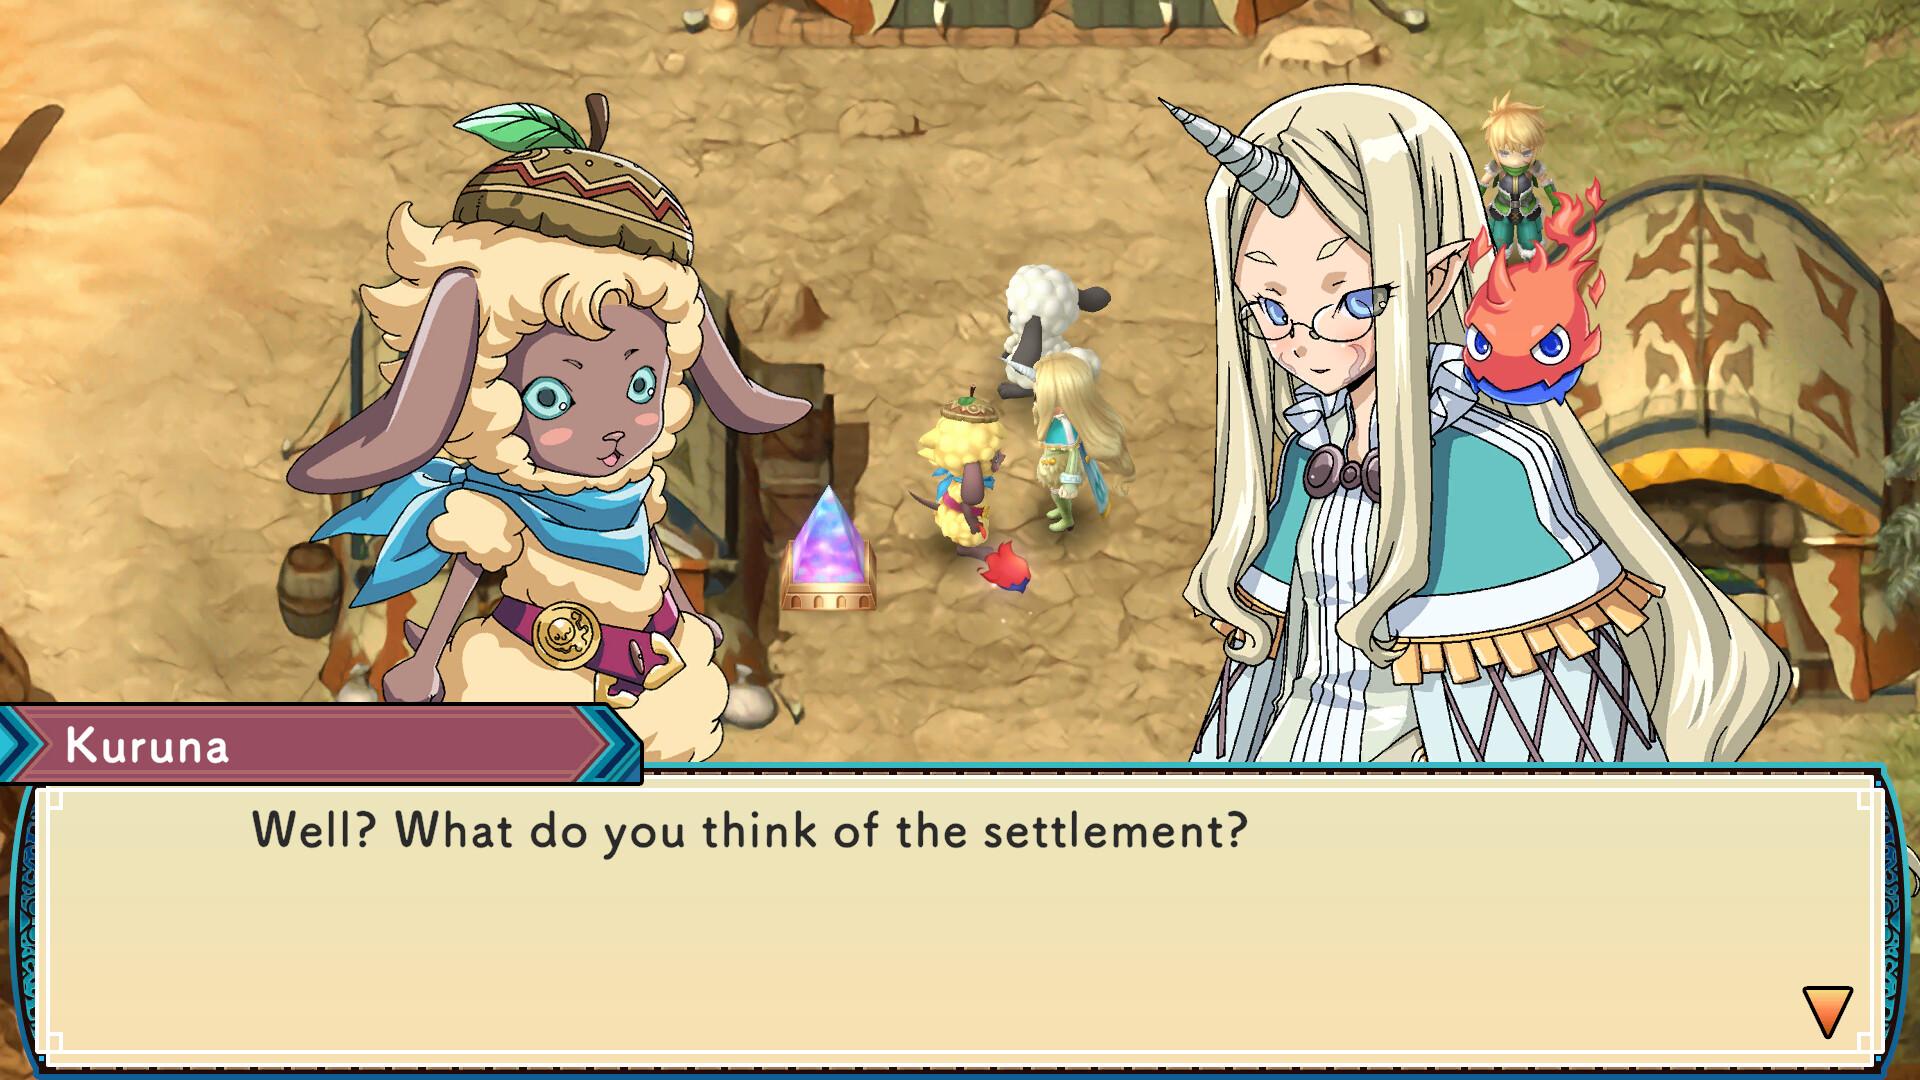 Screenshot №3 from game Rune Factory 3 Special